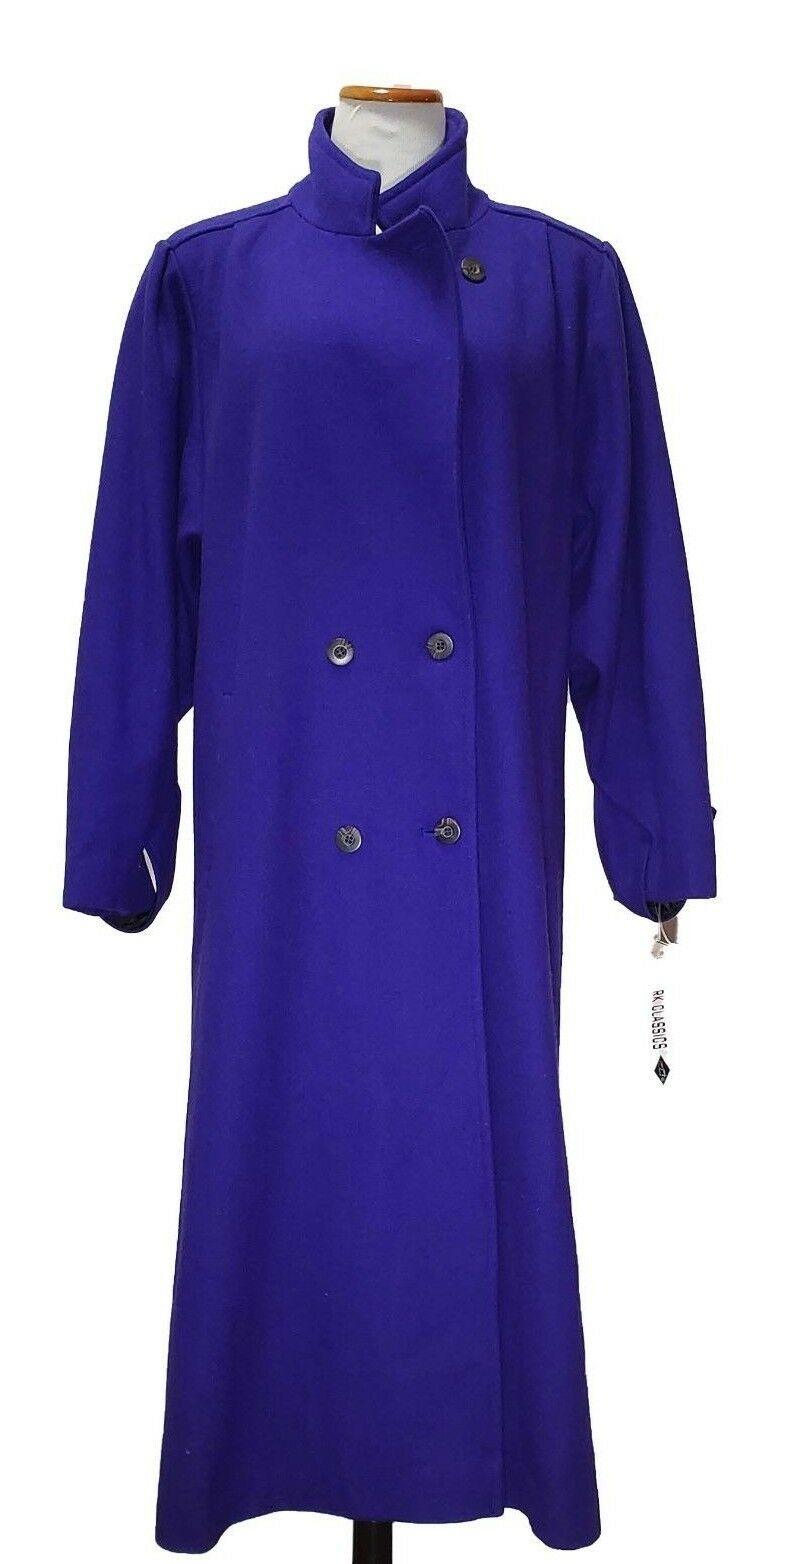 NWT Vintage New York Classics  Womens Blue Indigo Double Breasted Wool Coat Size 10 - SVNYFancy